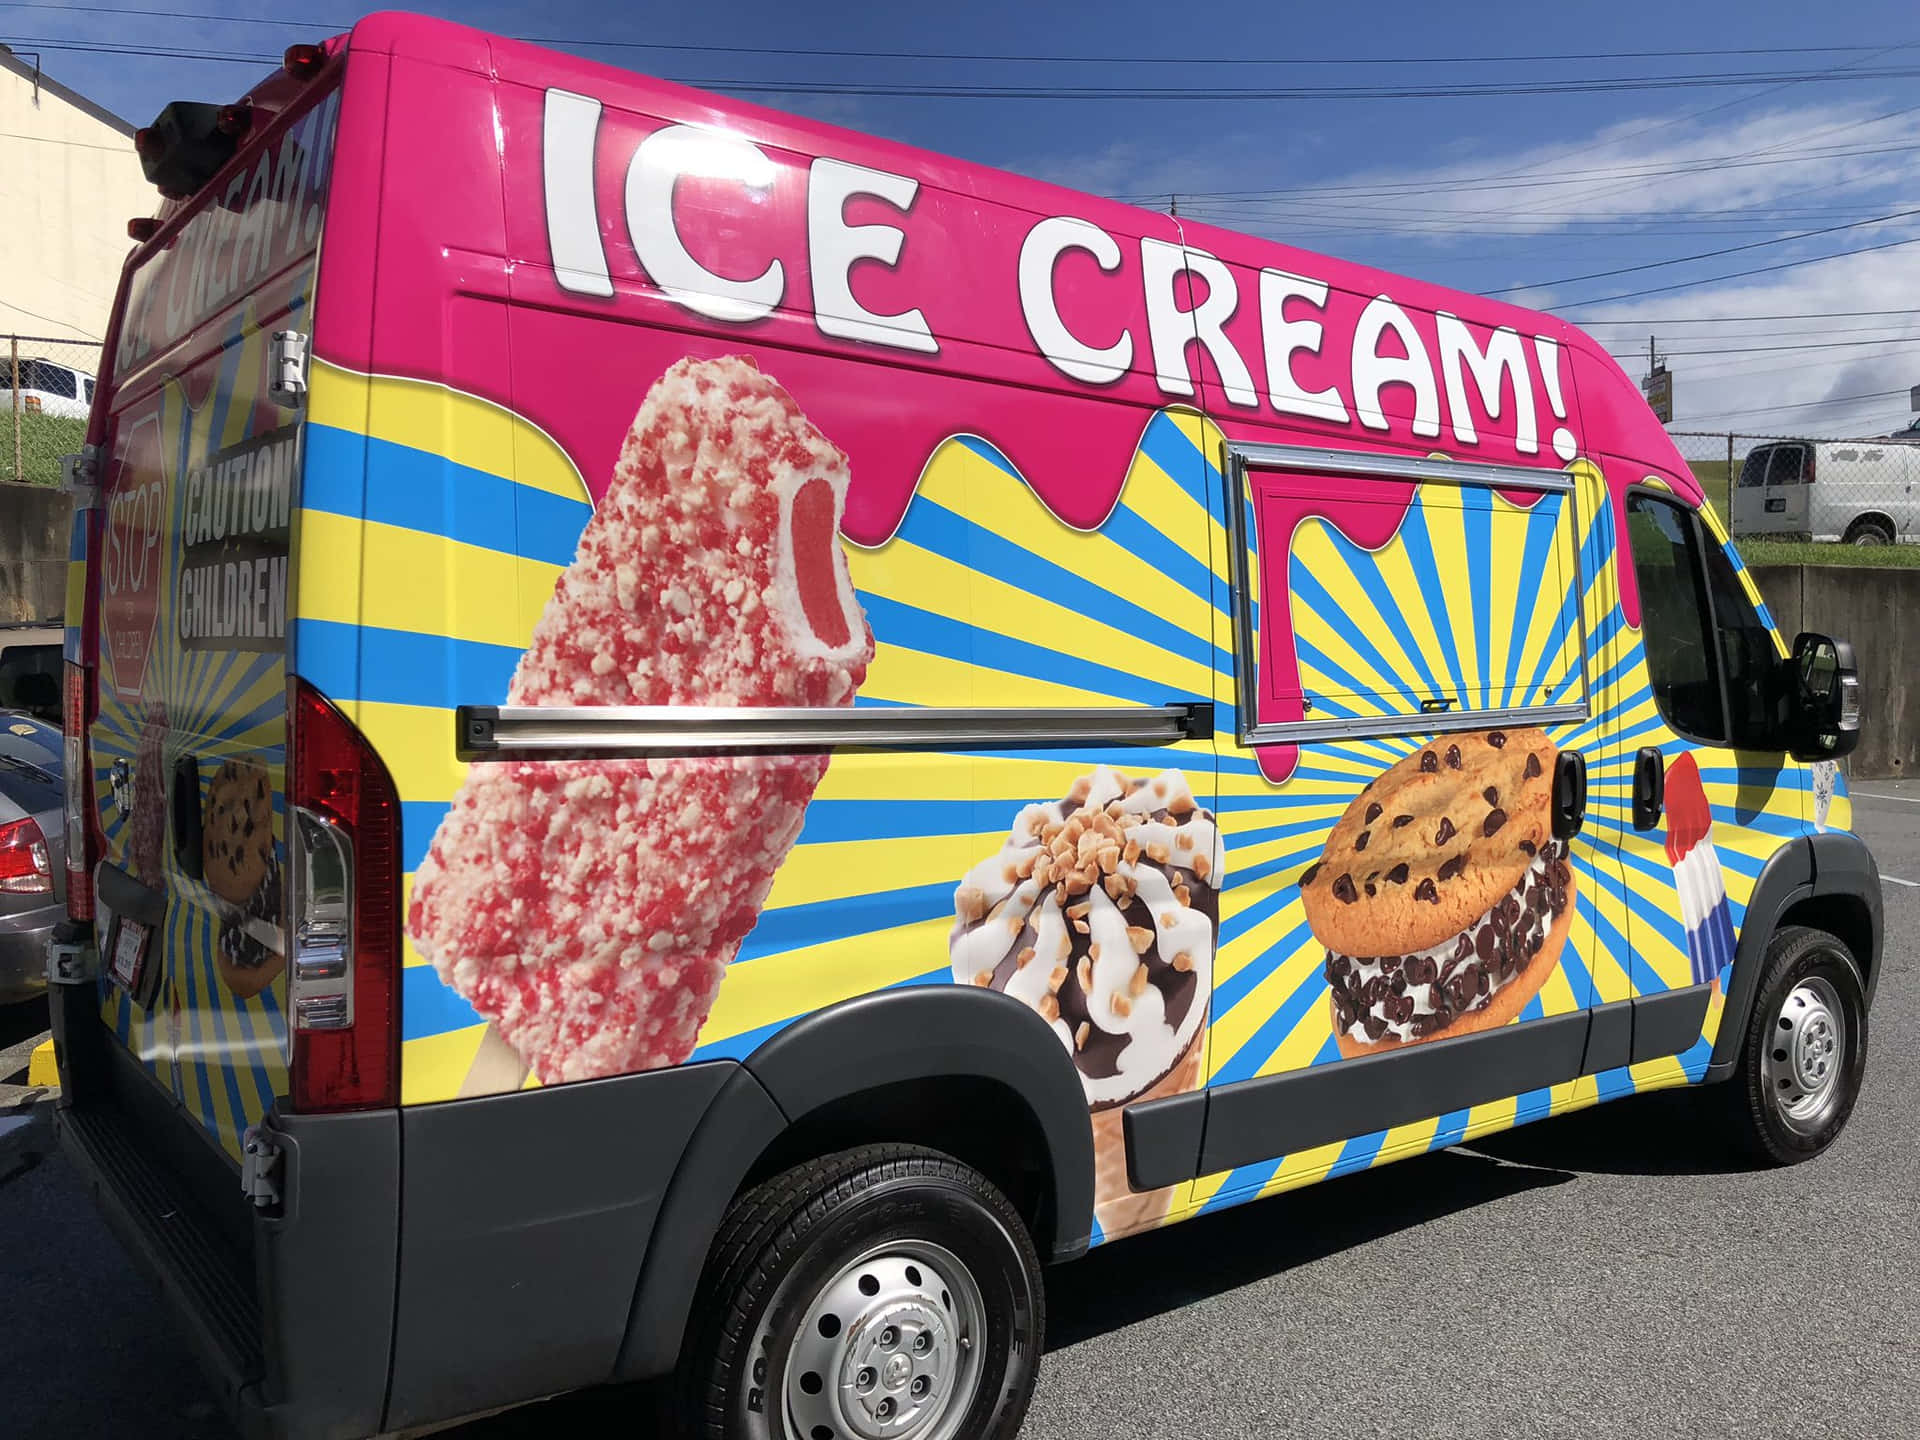 Get Delicious Ice Cream From the Brightly Colored Dream Truck